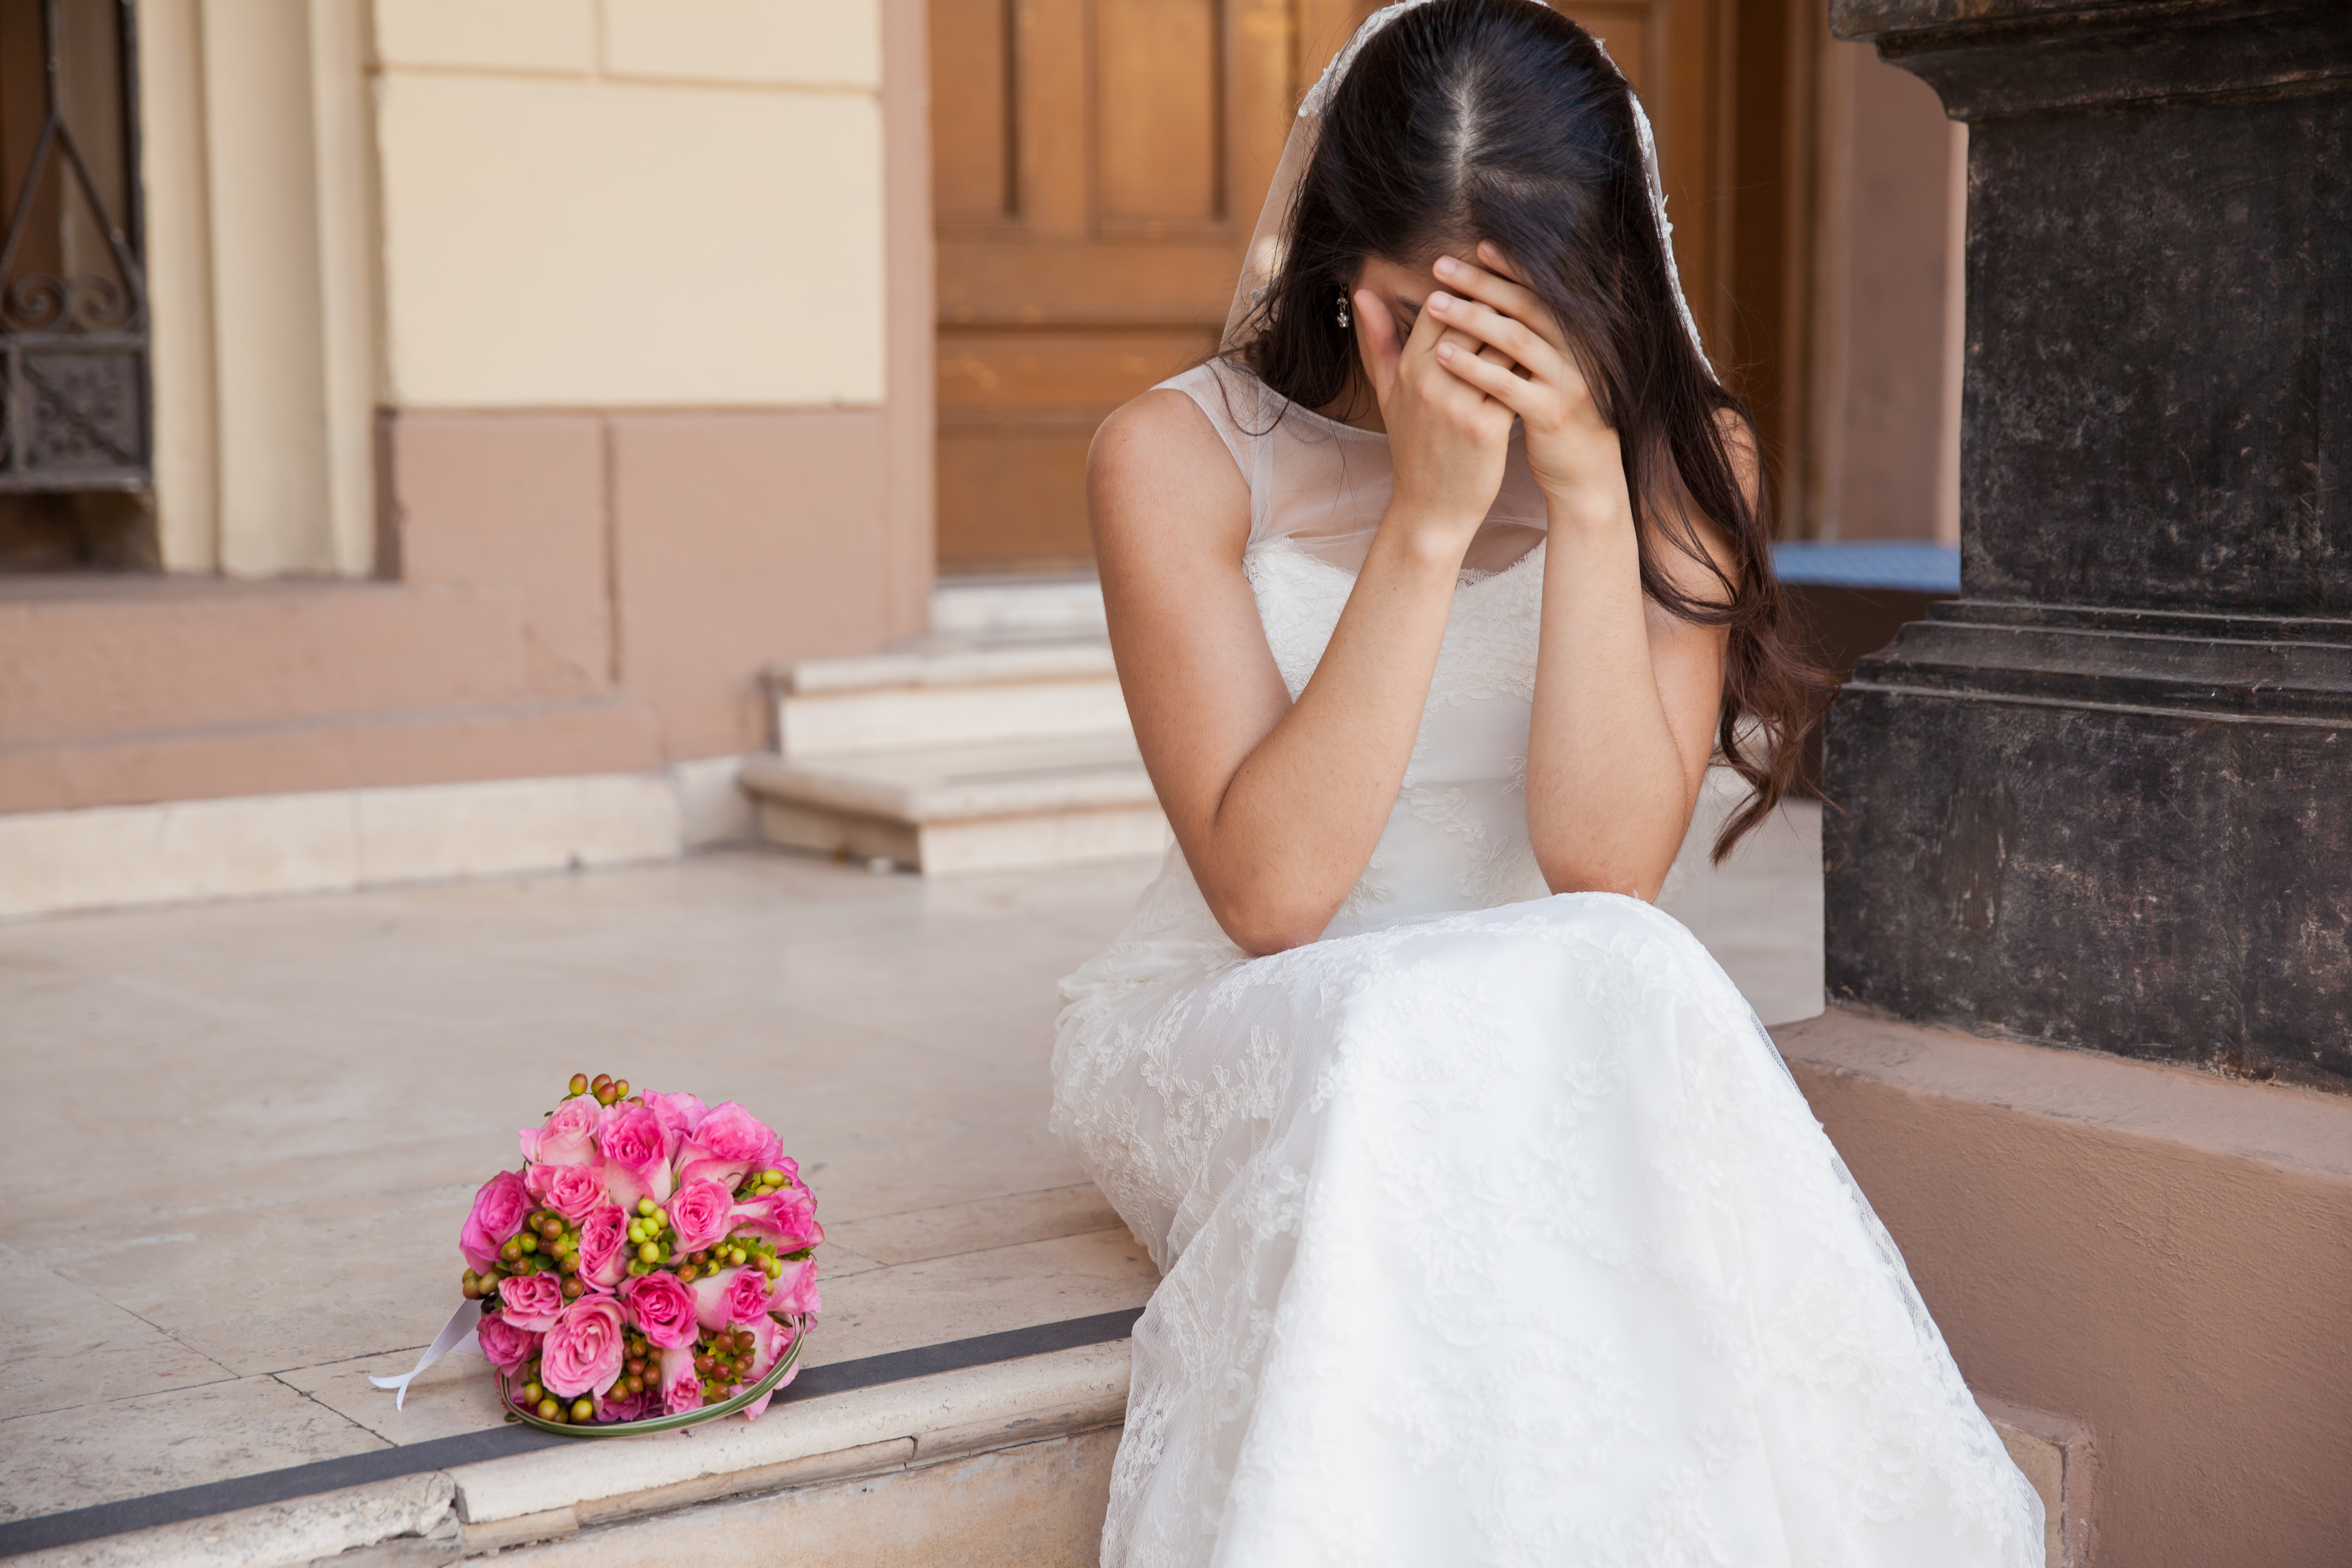 A bride crying outside a church | Source: Shutterstock